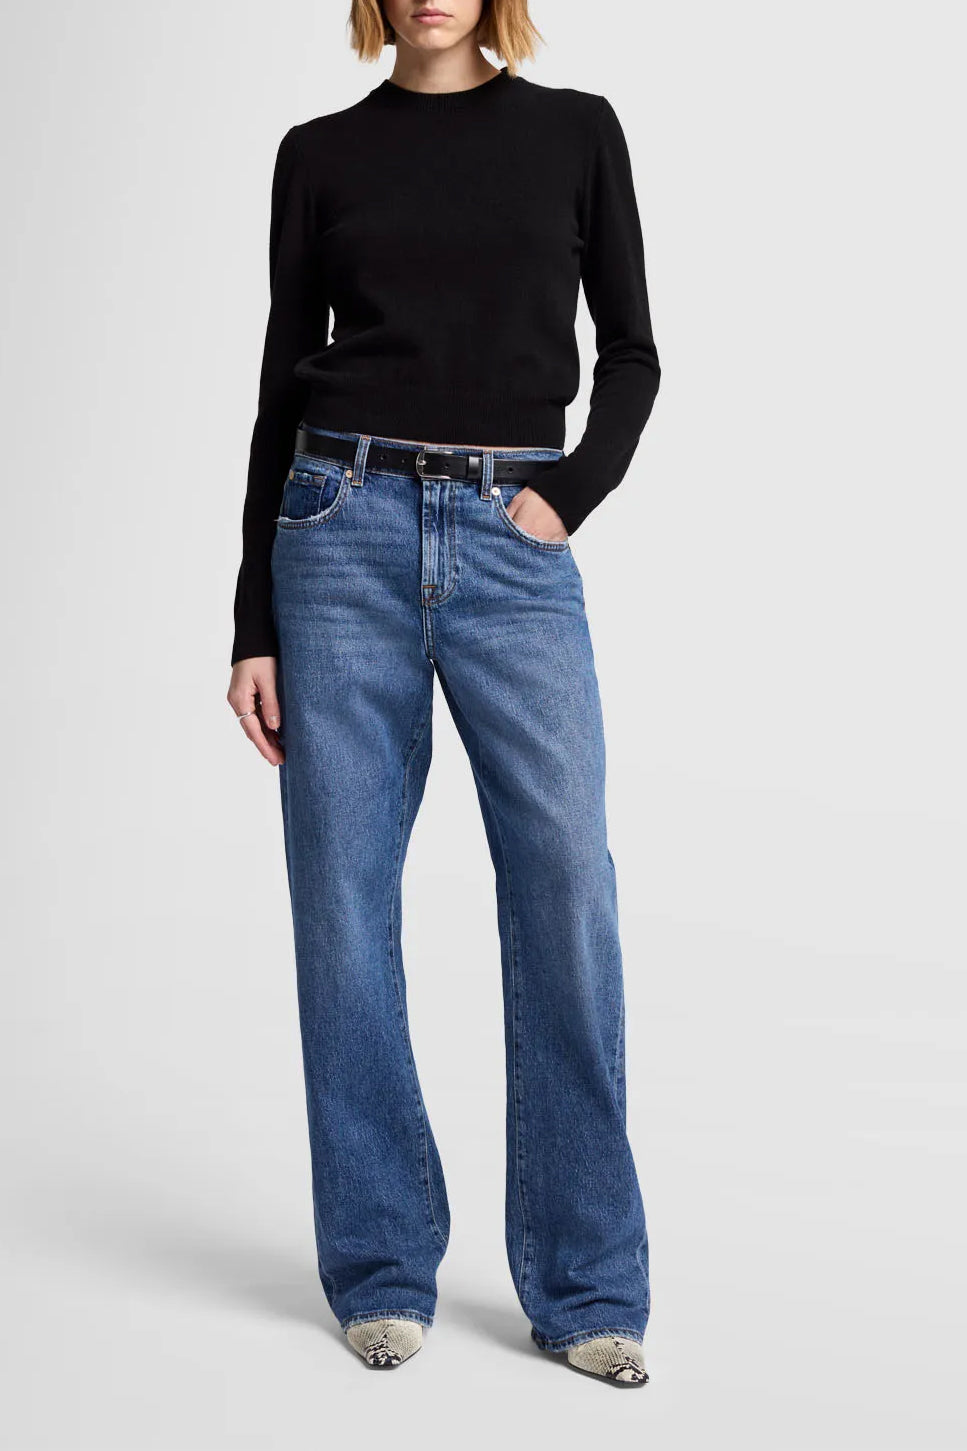 Jeans Tess Santa Cruz in Mid Blue7 For All Mankind - Anita Hass